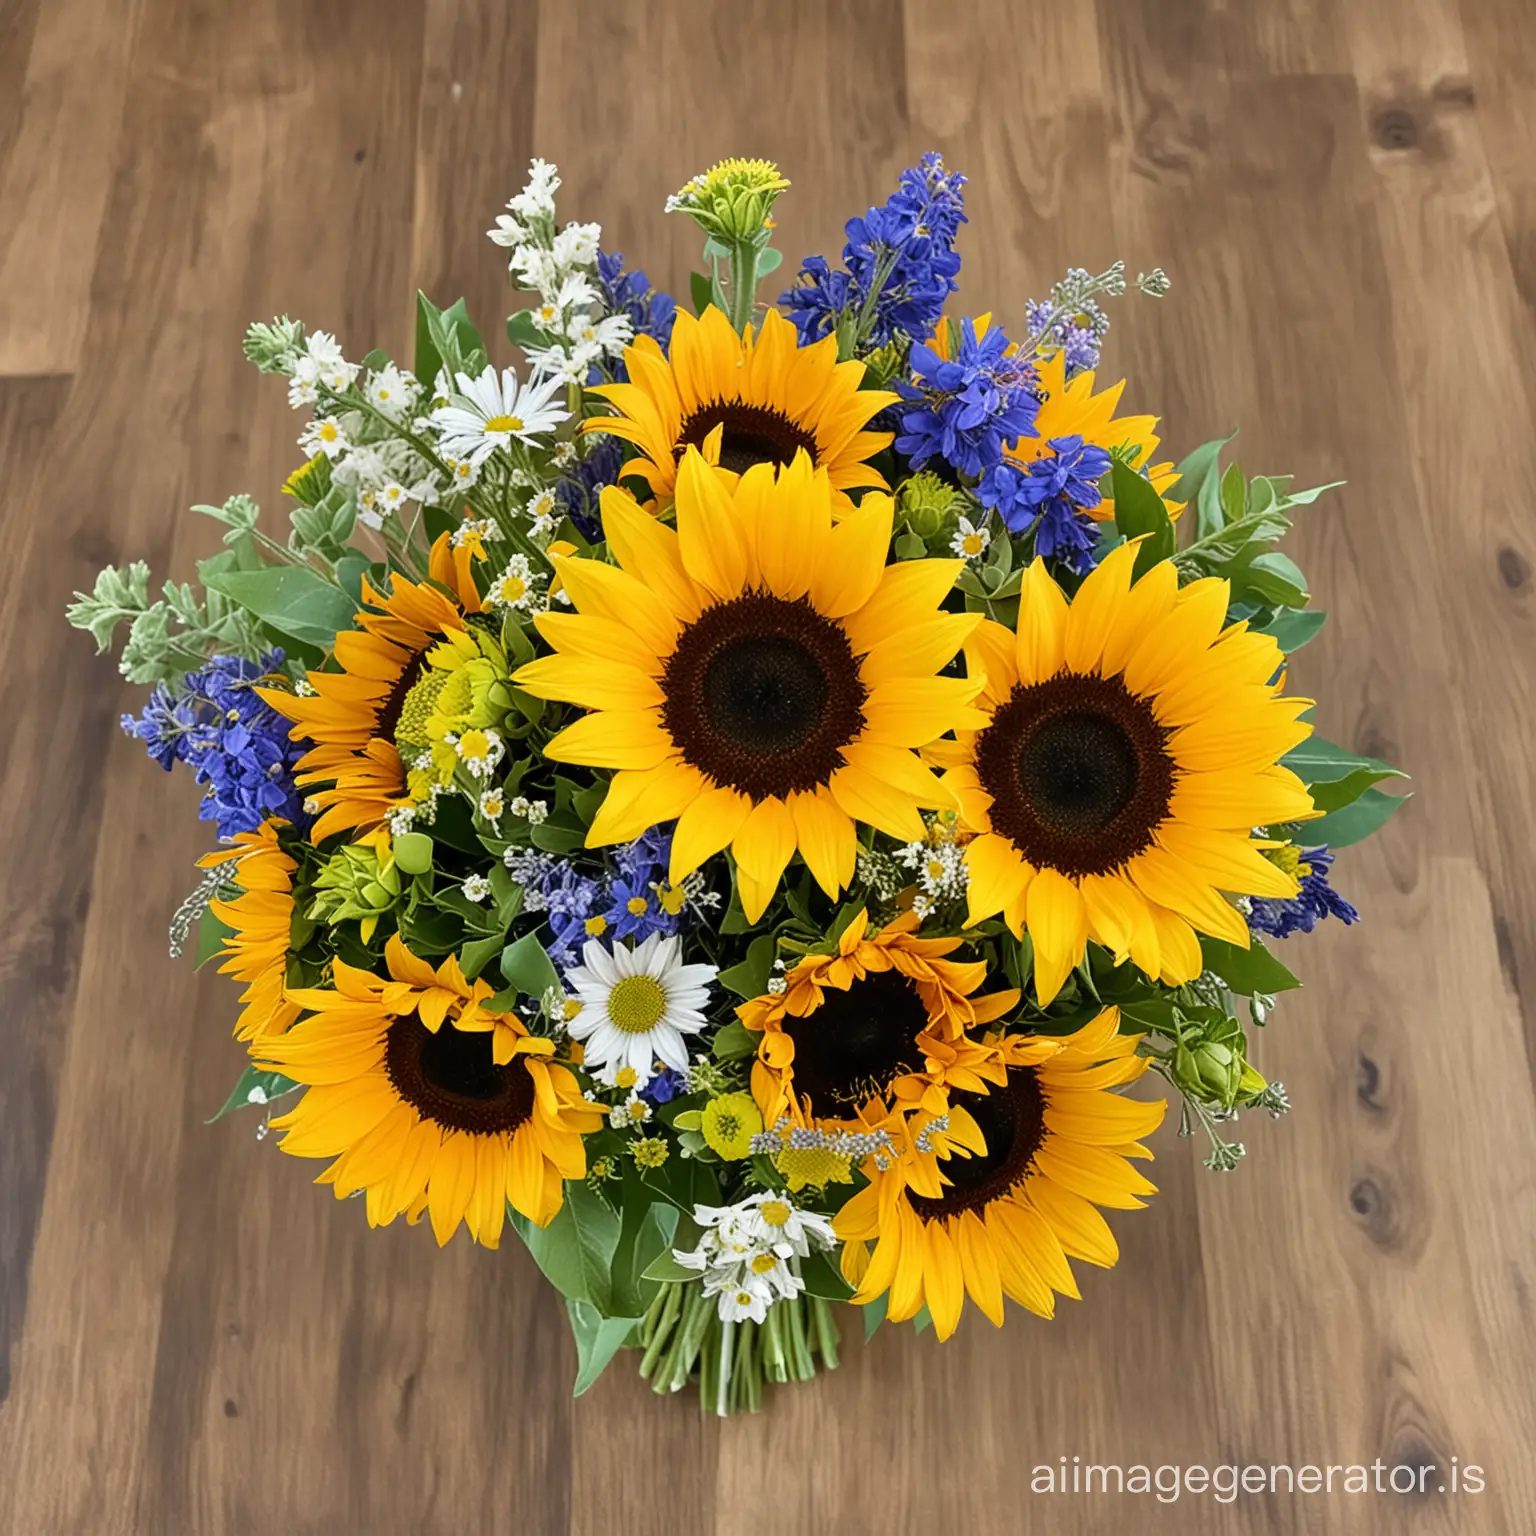 a fresh sunflower bouquet mixed with fresh wildflowers